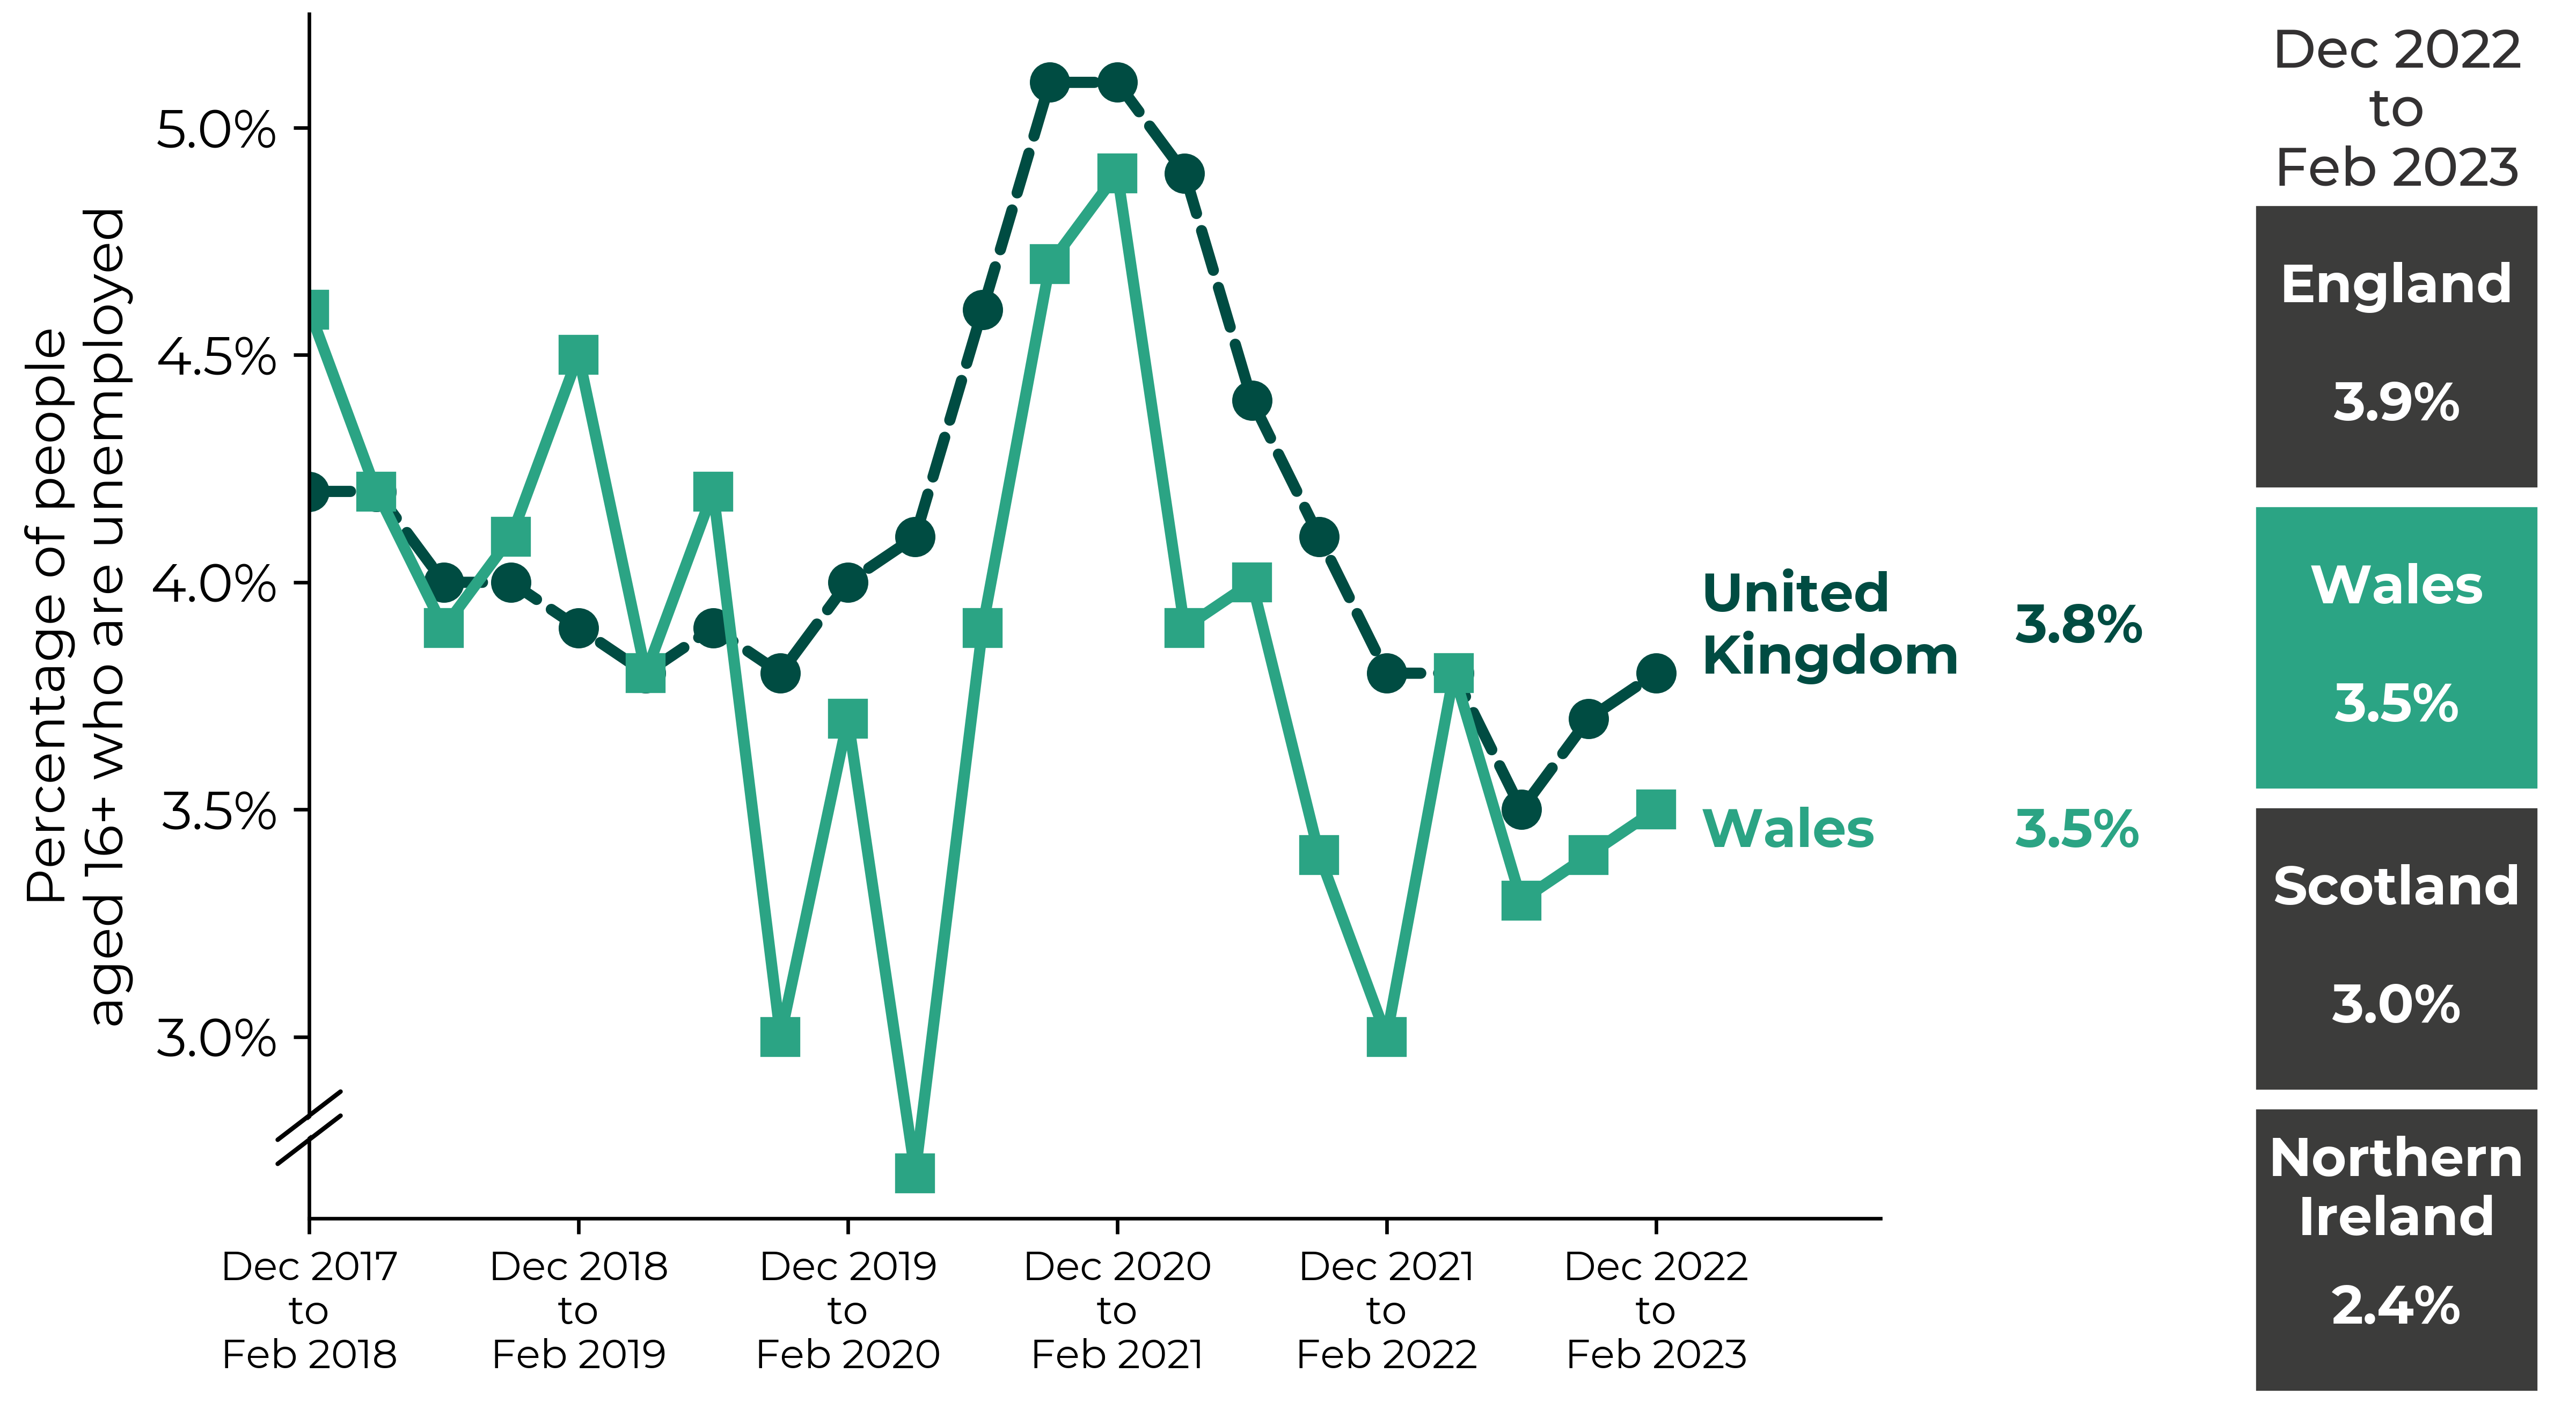 Graph showing an overall decrease in Wales' unemployment rate from over 4.5% in 2017 to under 3% in early 2020. This was followed by a peak of almost 5% during the period December 2020 to February 2021. UK unemployment rate followed a similar pattern. Figures for the latest period (December 2022 to February 2023) are Northern Ireland 2.4%, Scotland 3.0%, Wales 3.5%, England 3.9% and UK 3.8%.